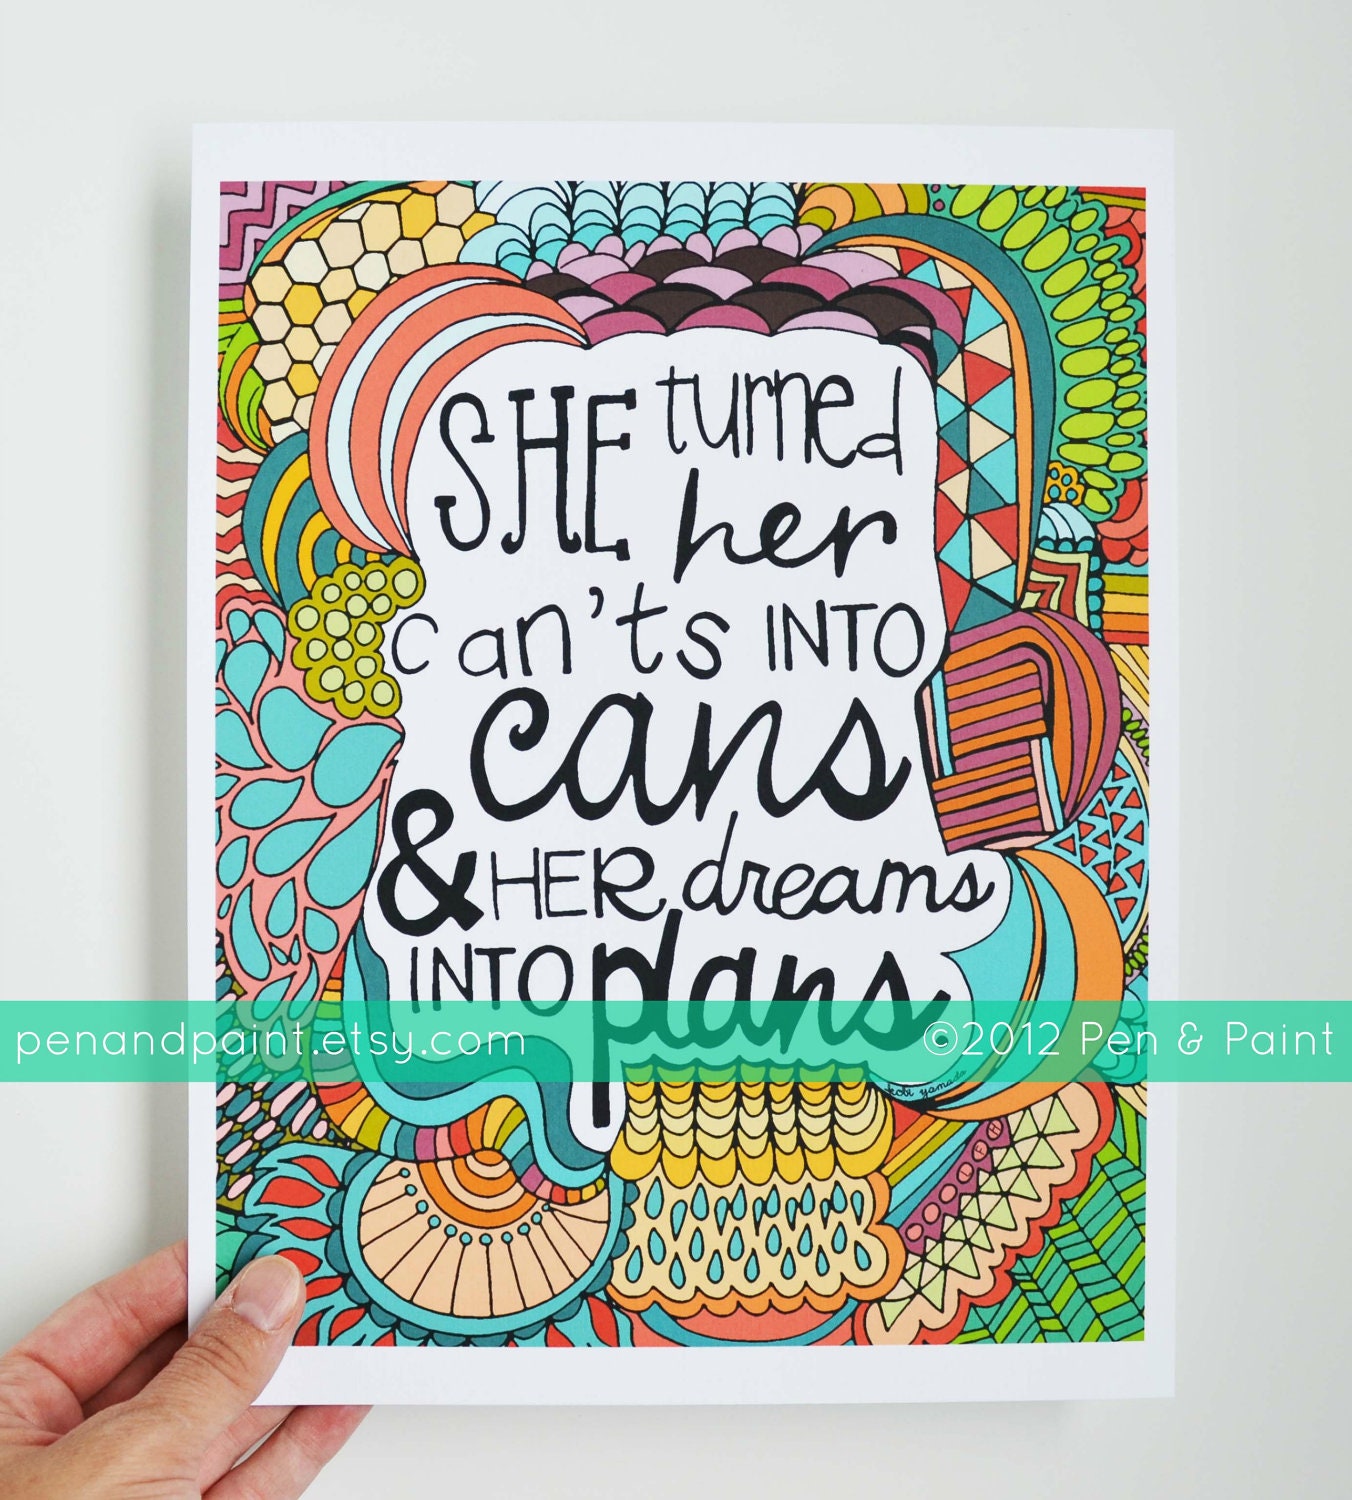 She Turned Her Can'ts Into Cans and Her Dreams Into Plans, Kobi Yamada Graduation Gift, Illustration, Inspiring Quote, 8 x 10 Art Print